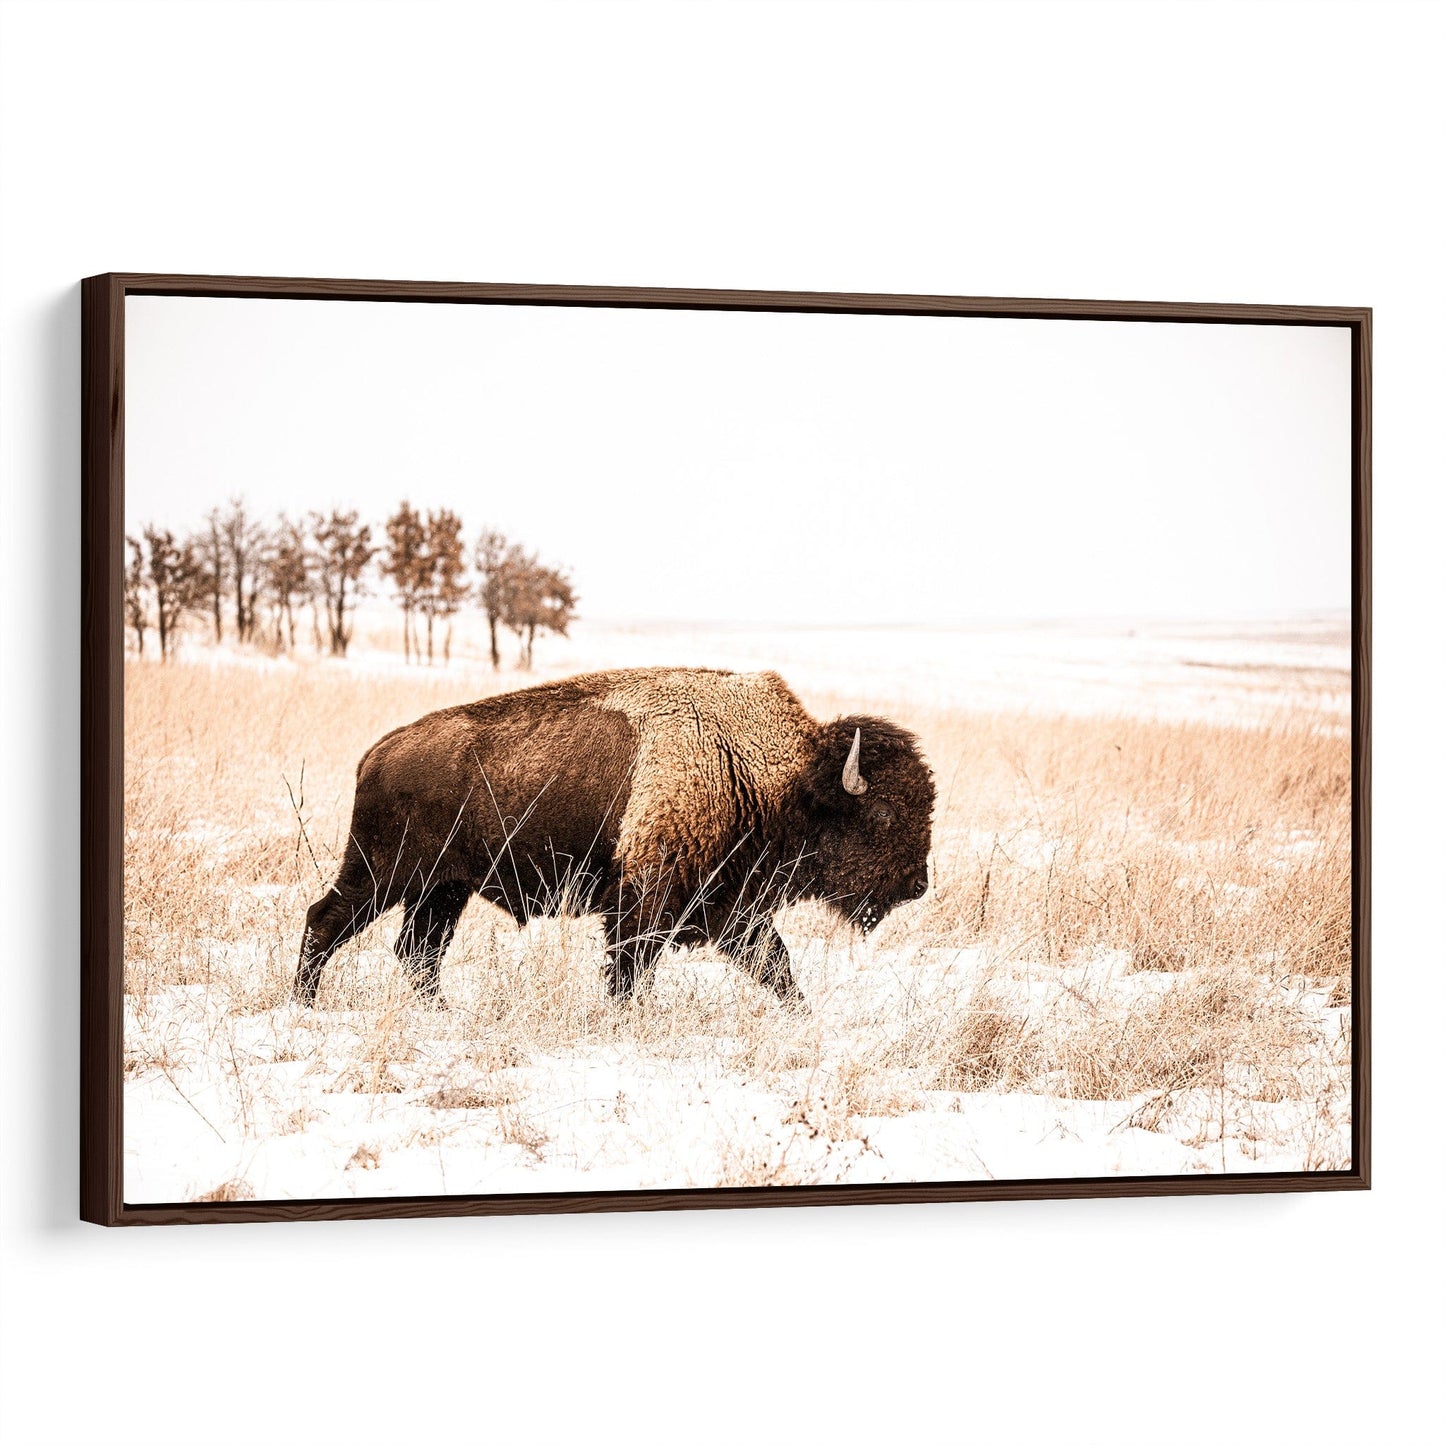 Bison Canvas Wall Art - Brown & Sepia Tone Western Decor Canvas-Walnut Frame / 12 x 18 Inches Wall Art Teri James Photography